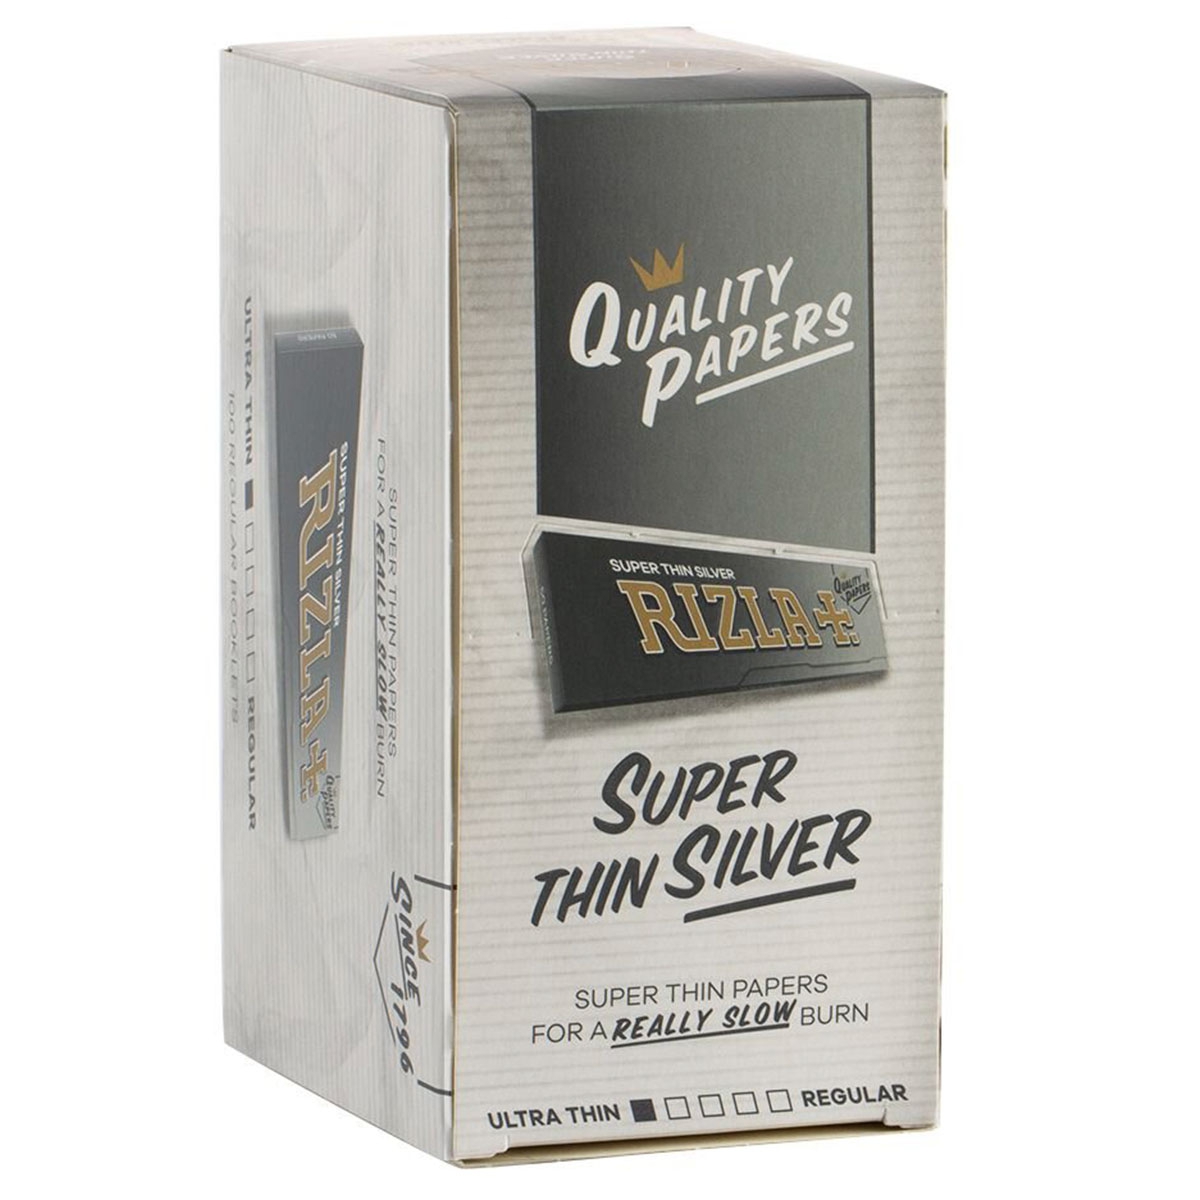 Rizla White Smoking Rolling Papers Regular Size-7 SPECIAL SUPER OFFER 